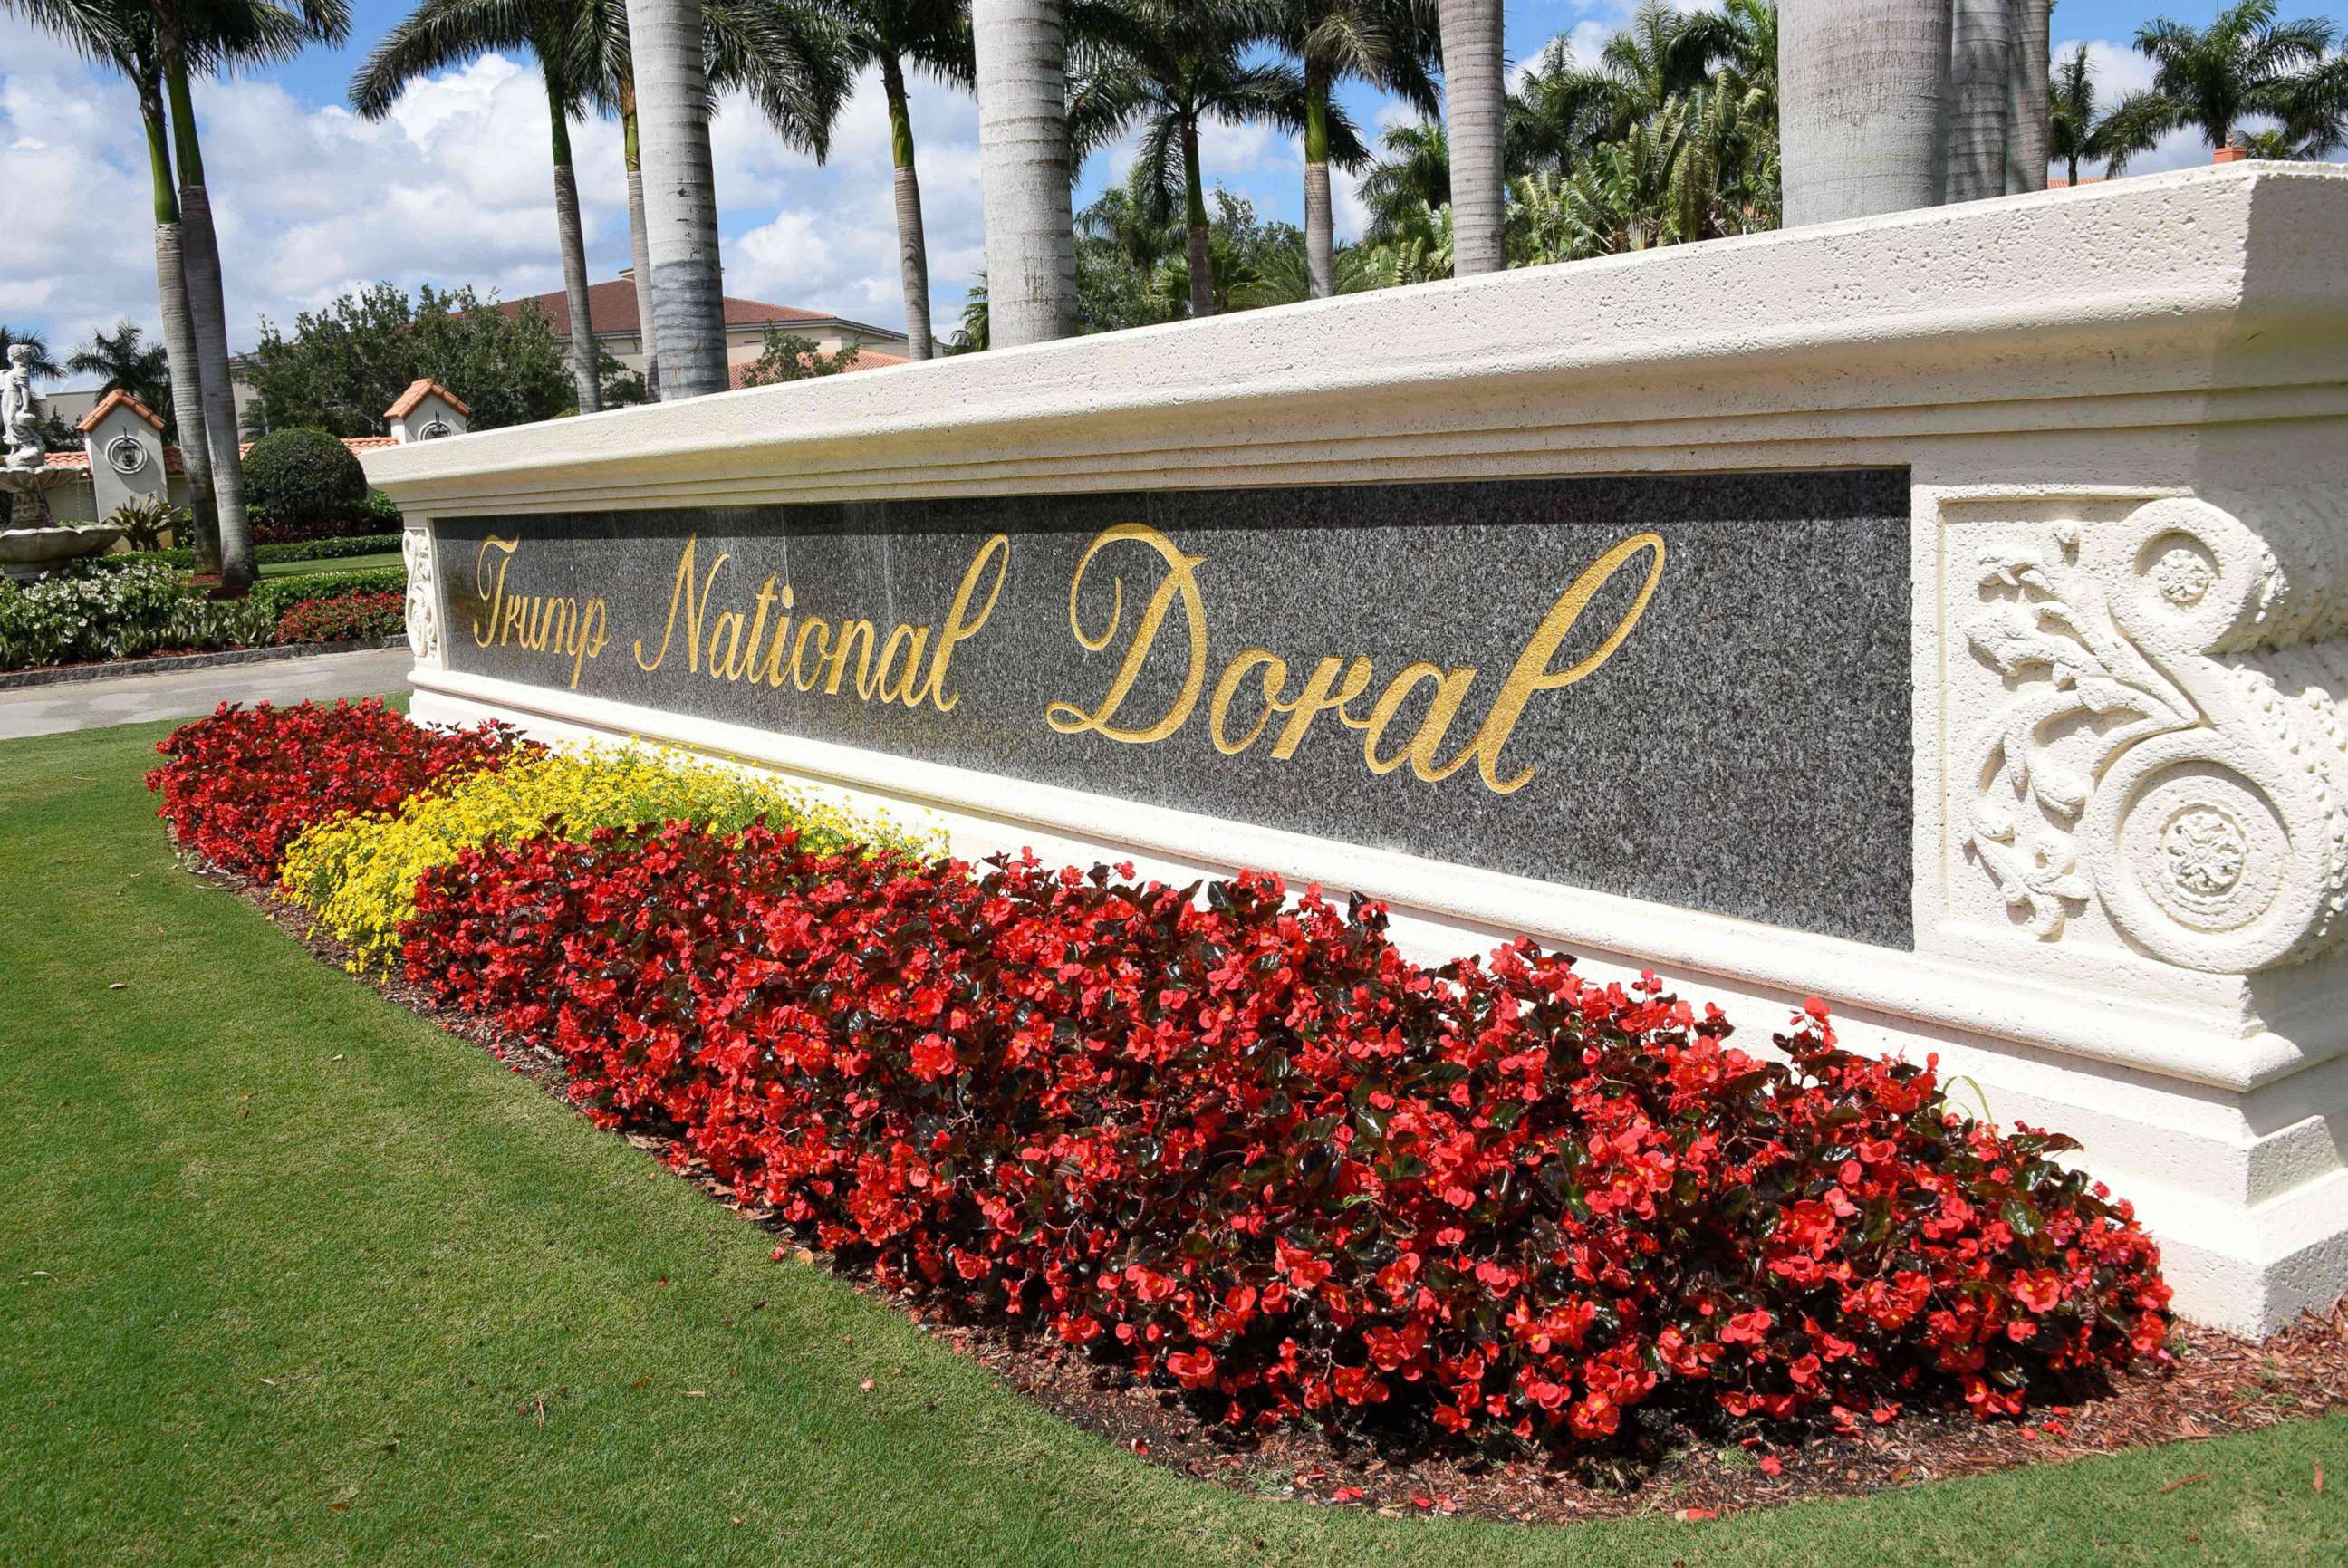 PHOTO: In this April 3, 2018, file photo, a view leading into Trump National Doral is seen in Miami, Fla.